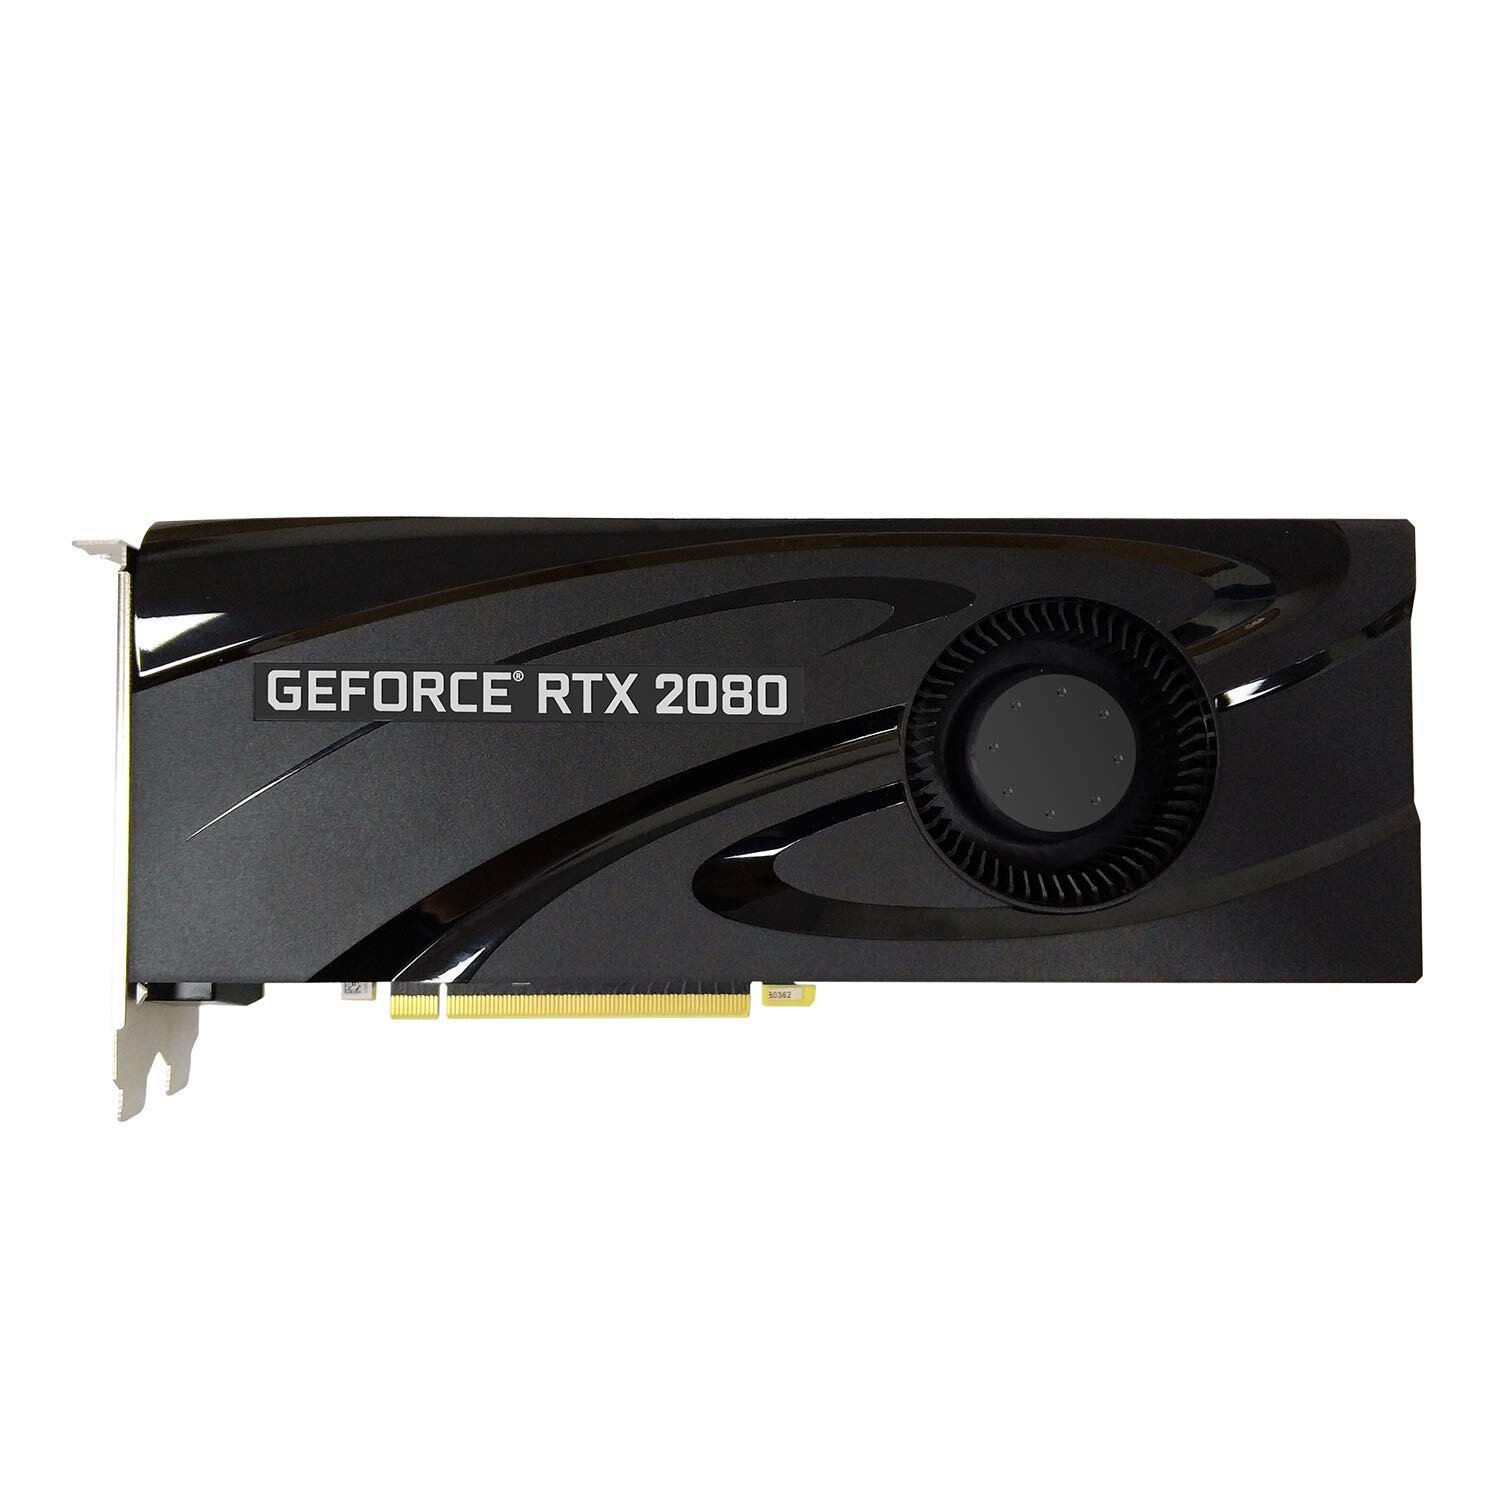 Buy Pny Geforce Rtx 2080 8gb Blower Graphics Card Online In Pakistan